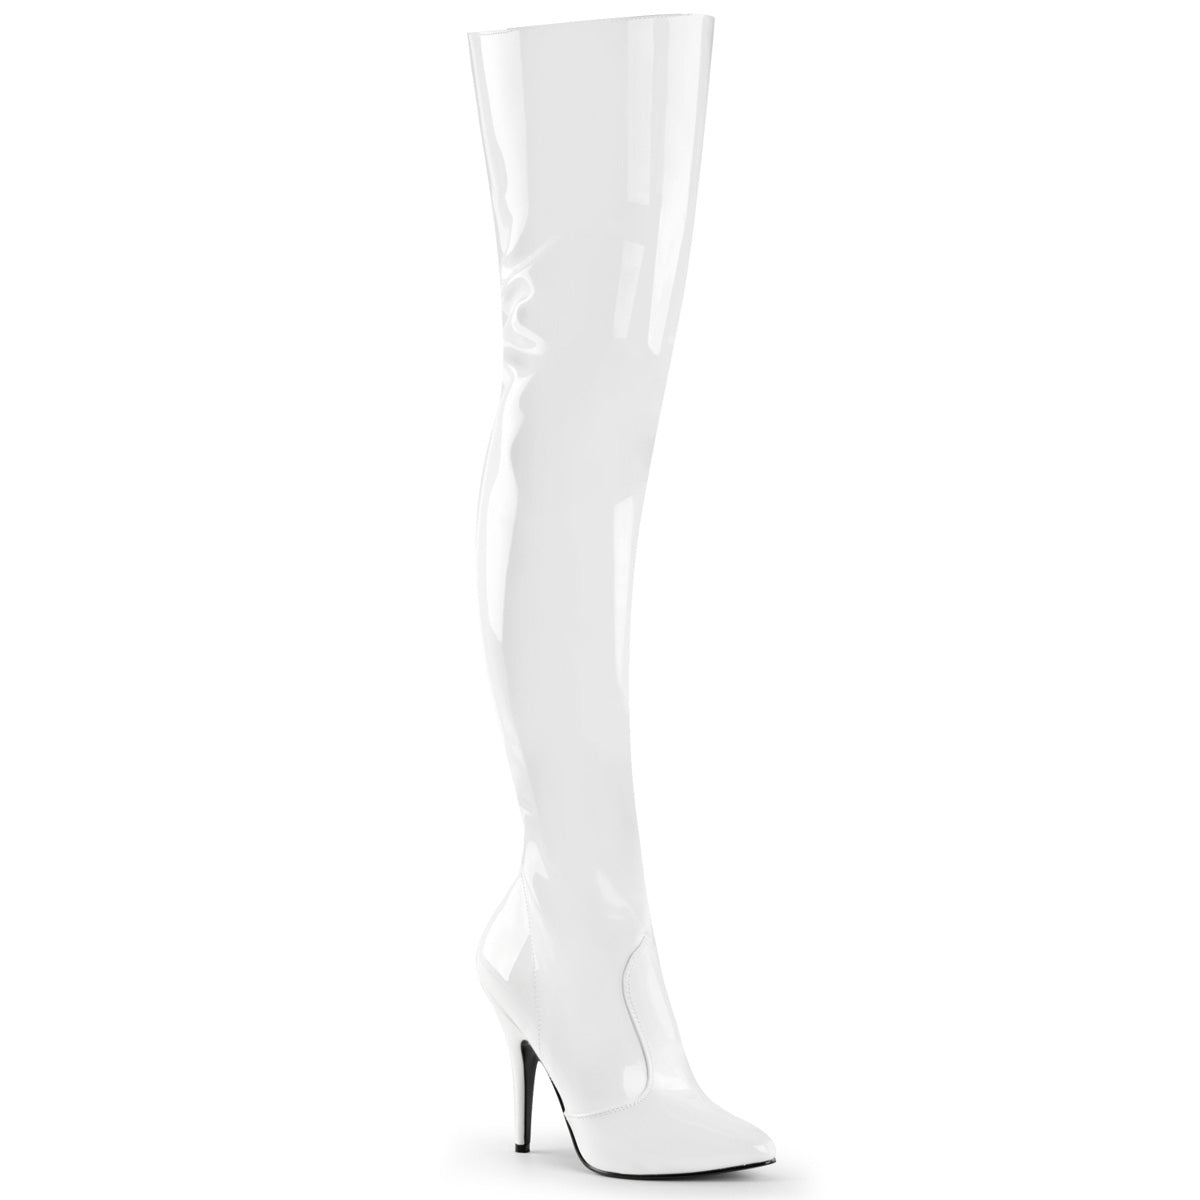 SEDUCE-3010 Thigh Boots 5" Heel White Patent Fetish Footwear-Pleaser- Sexy Shoes